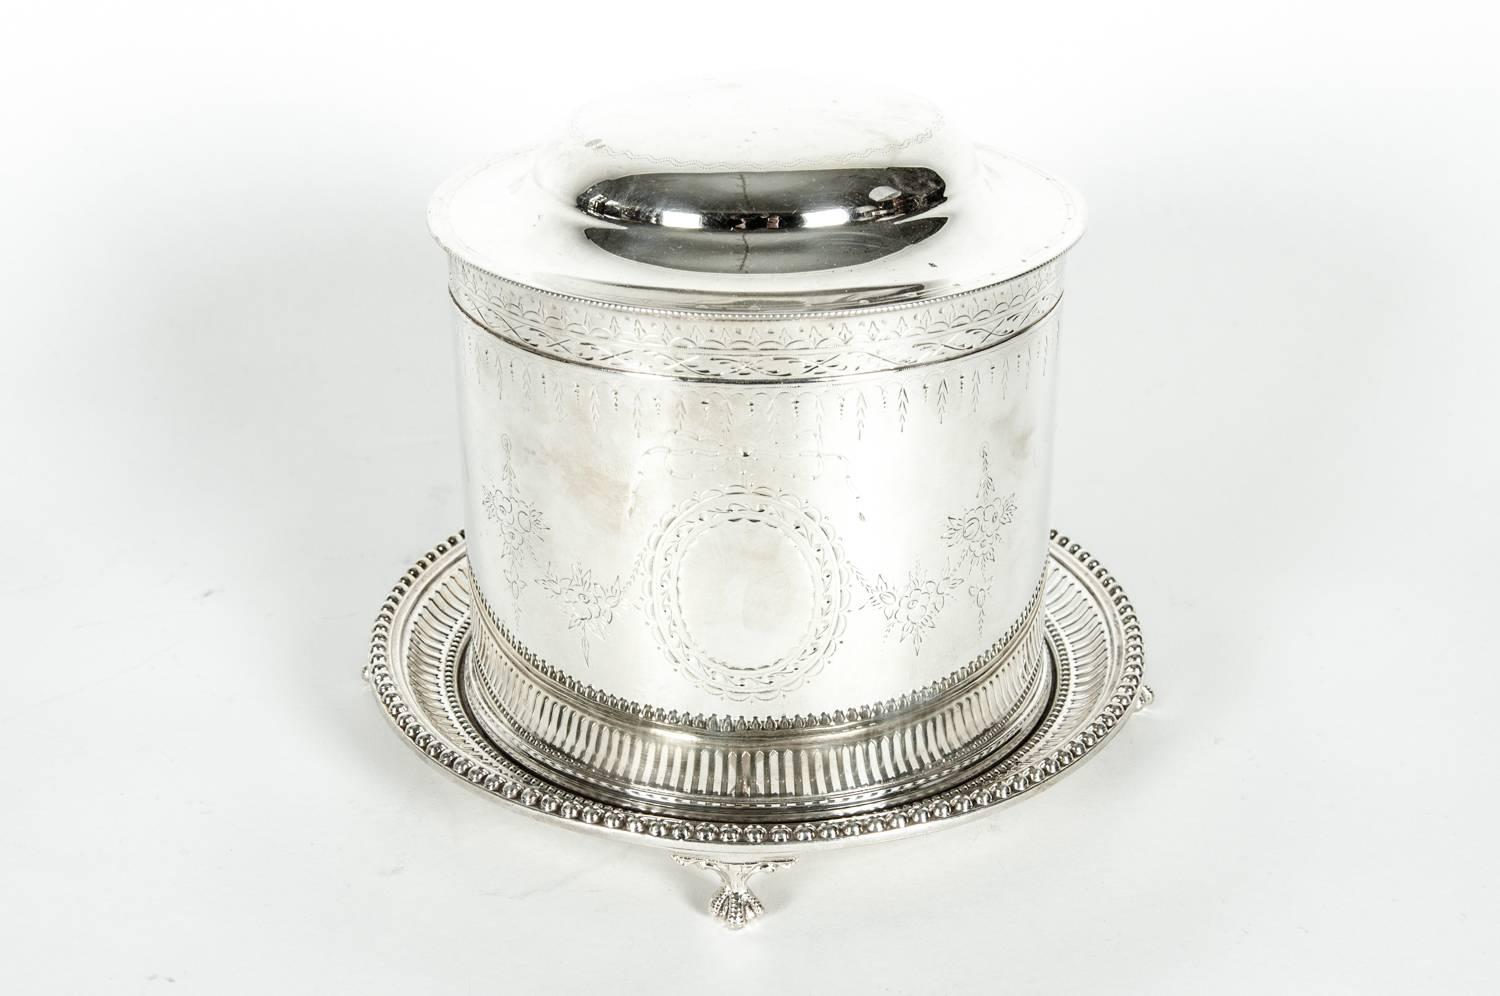 Beautiful English silver plate covered biscuit box/tea caddy with attached footed gallery tray. The Caddy is in excellent condition, it measures 10 inches high with lid open X 8 inches diameter. Maker's mark undersigned.